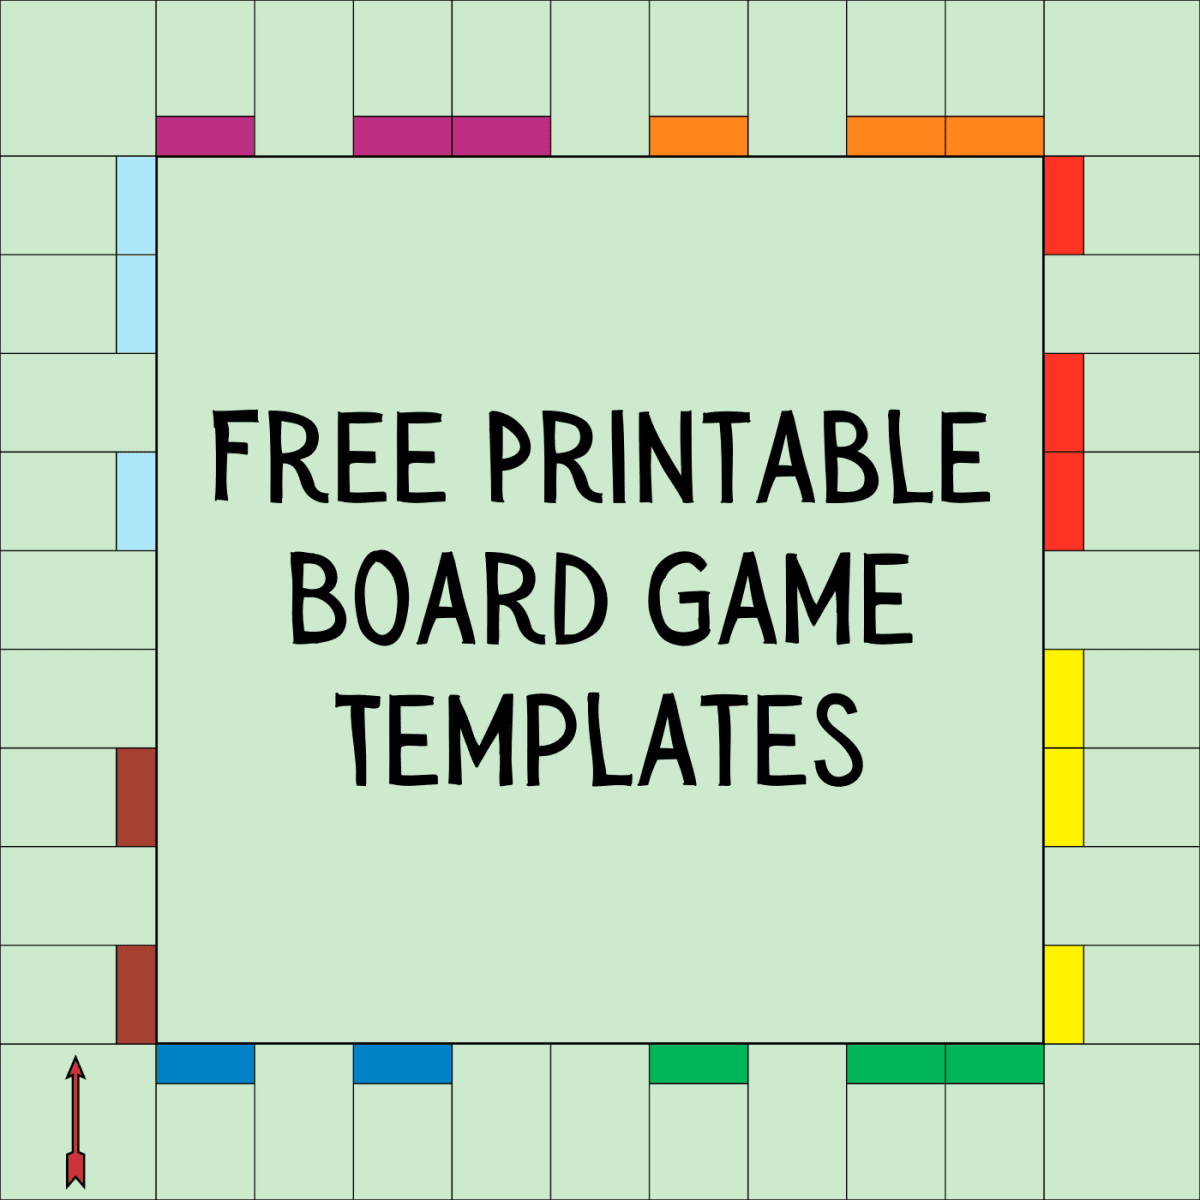 Introduction to Board Game Templates